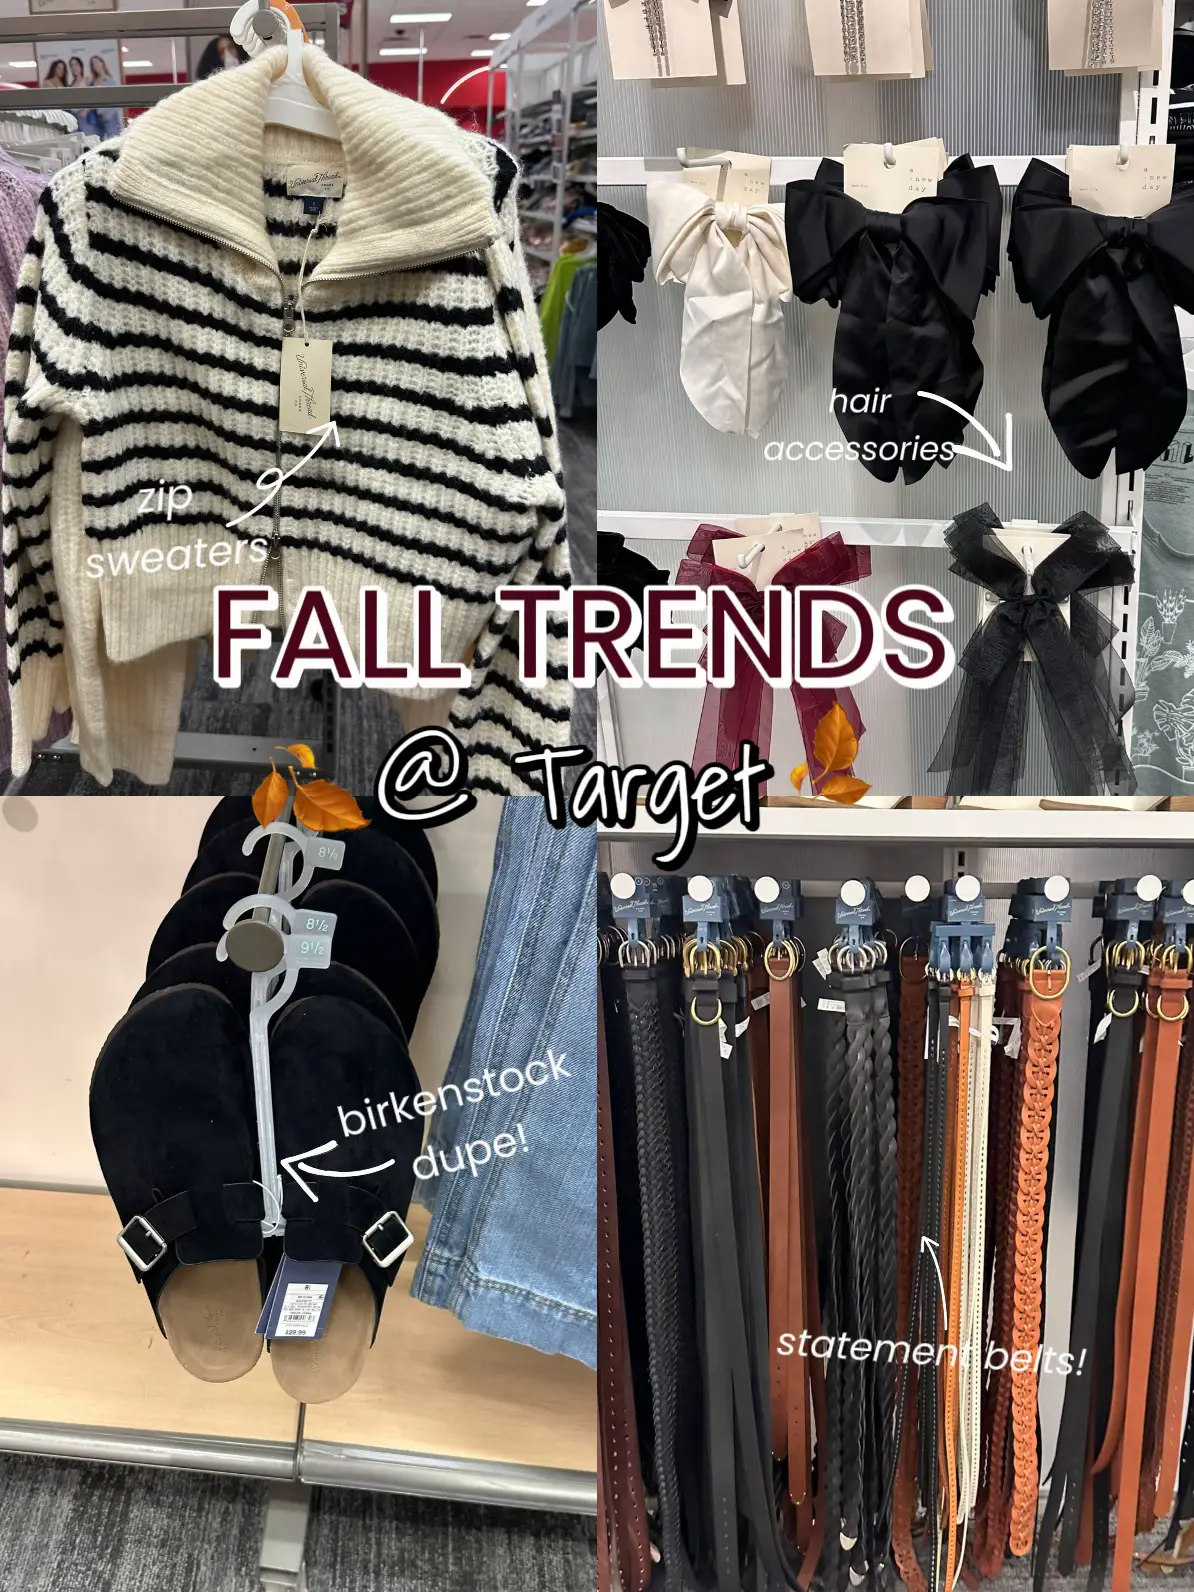 Target Cozy Loungewear Sets for $40, Gallery posted by Daniella Lopez